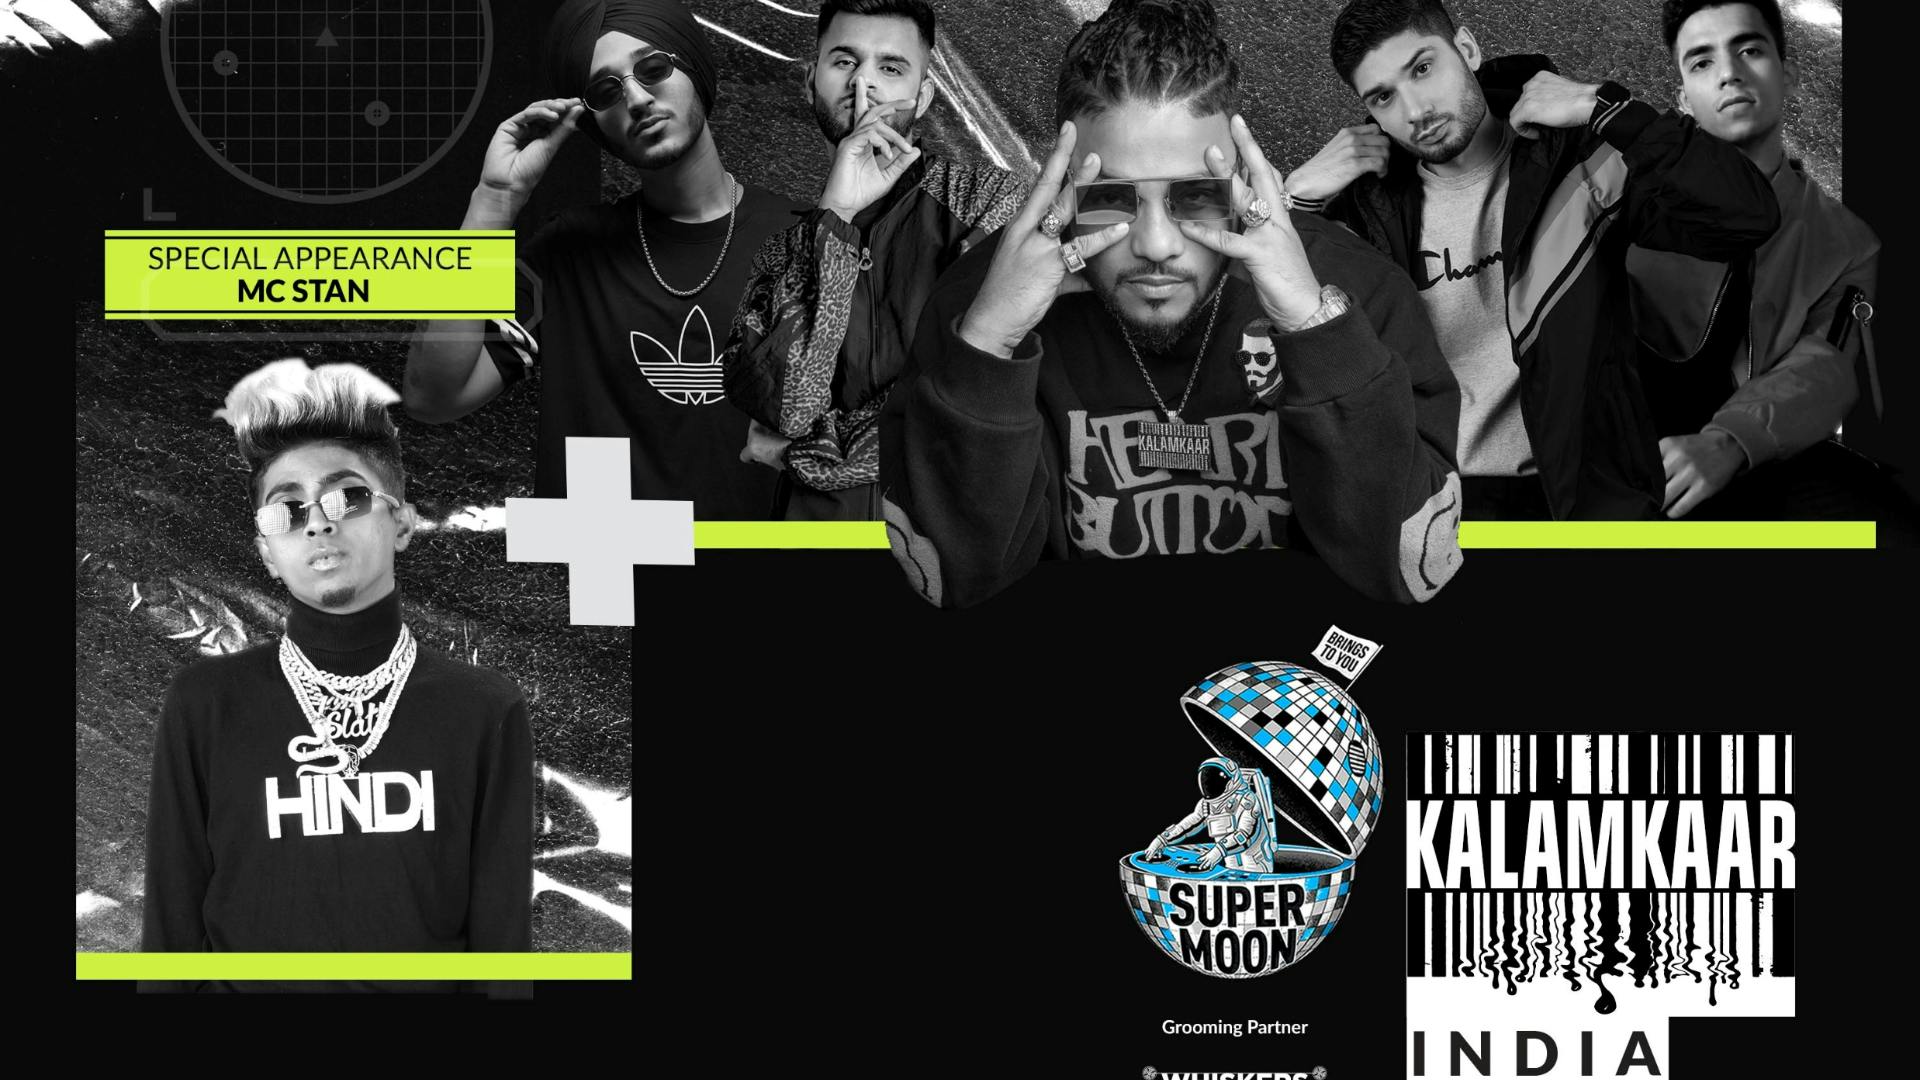 Siliconeer | There's Space For Regional Hip-hop, Says Raftaar | Siliconeer